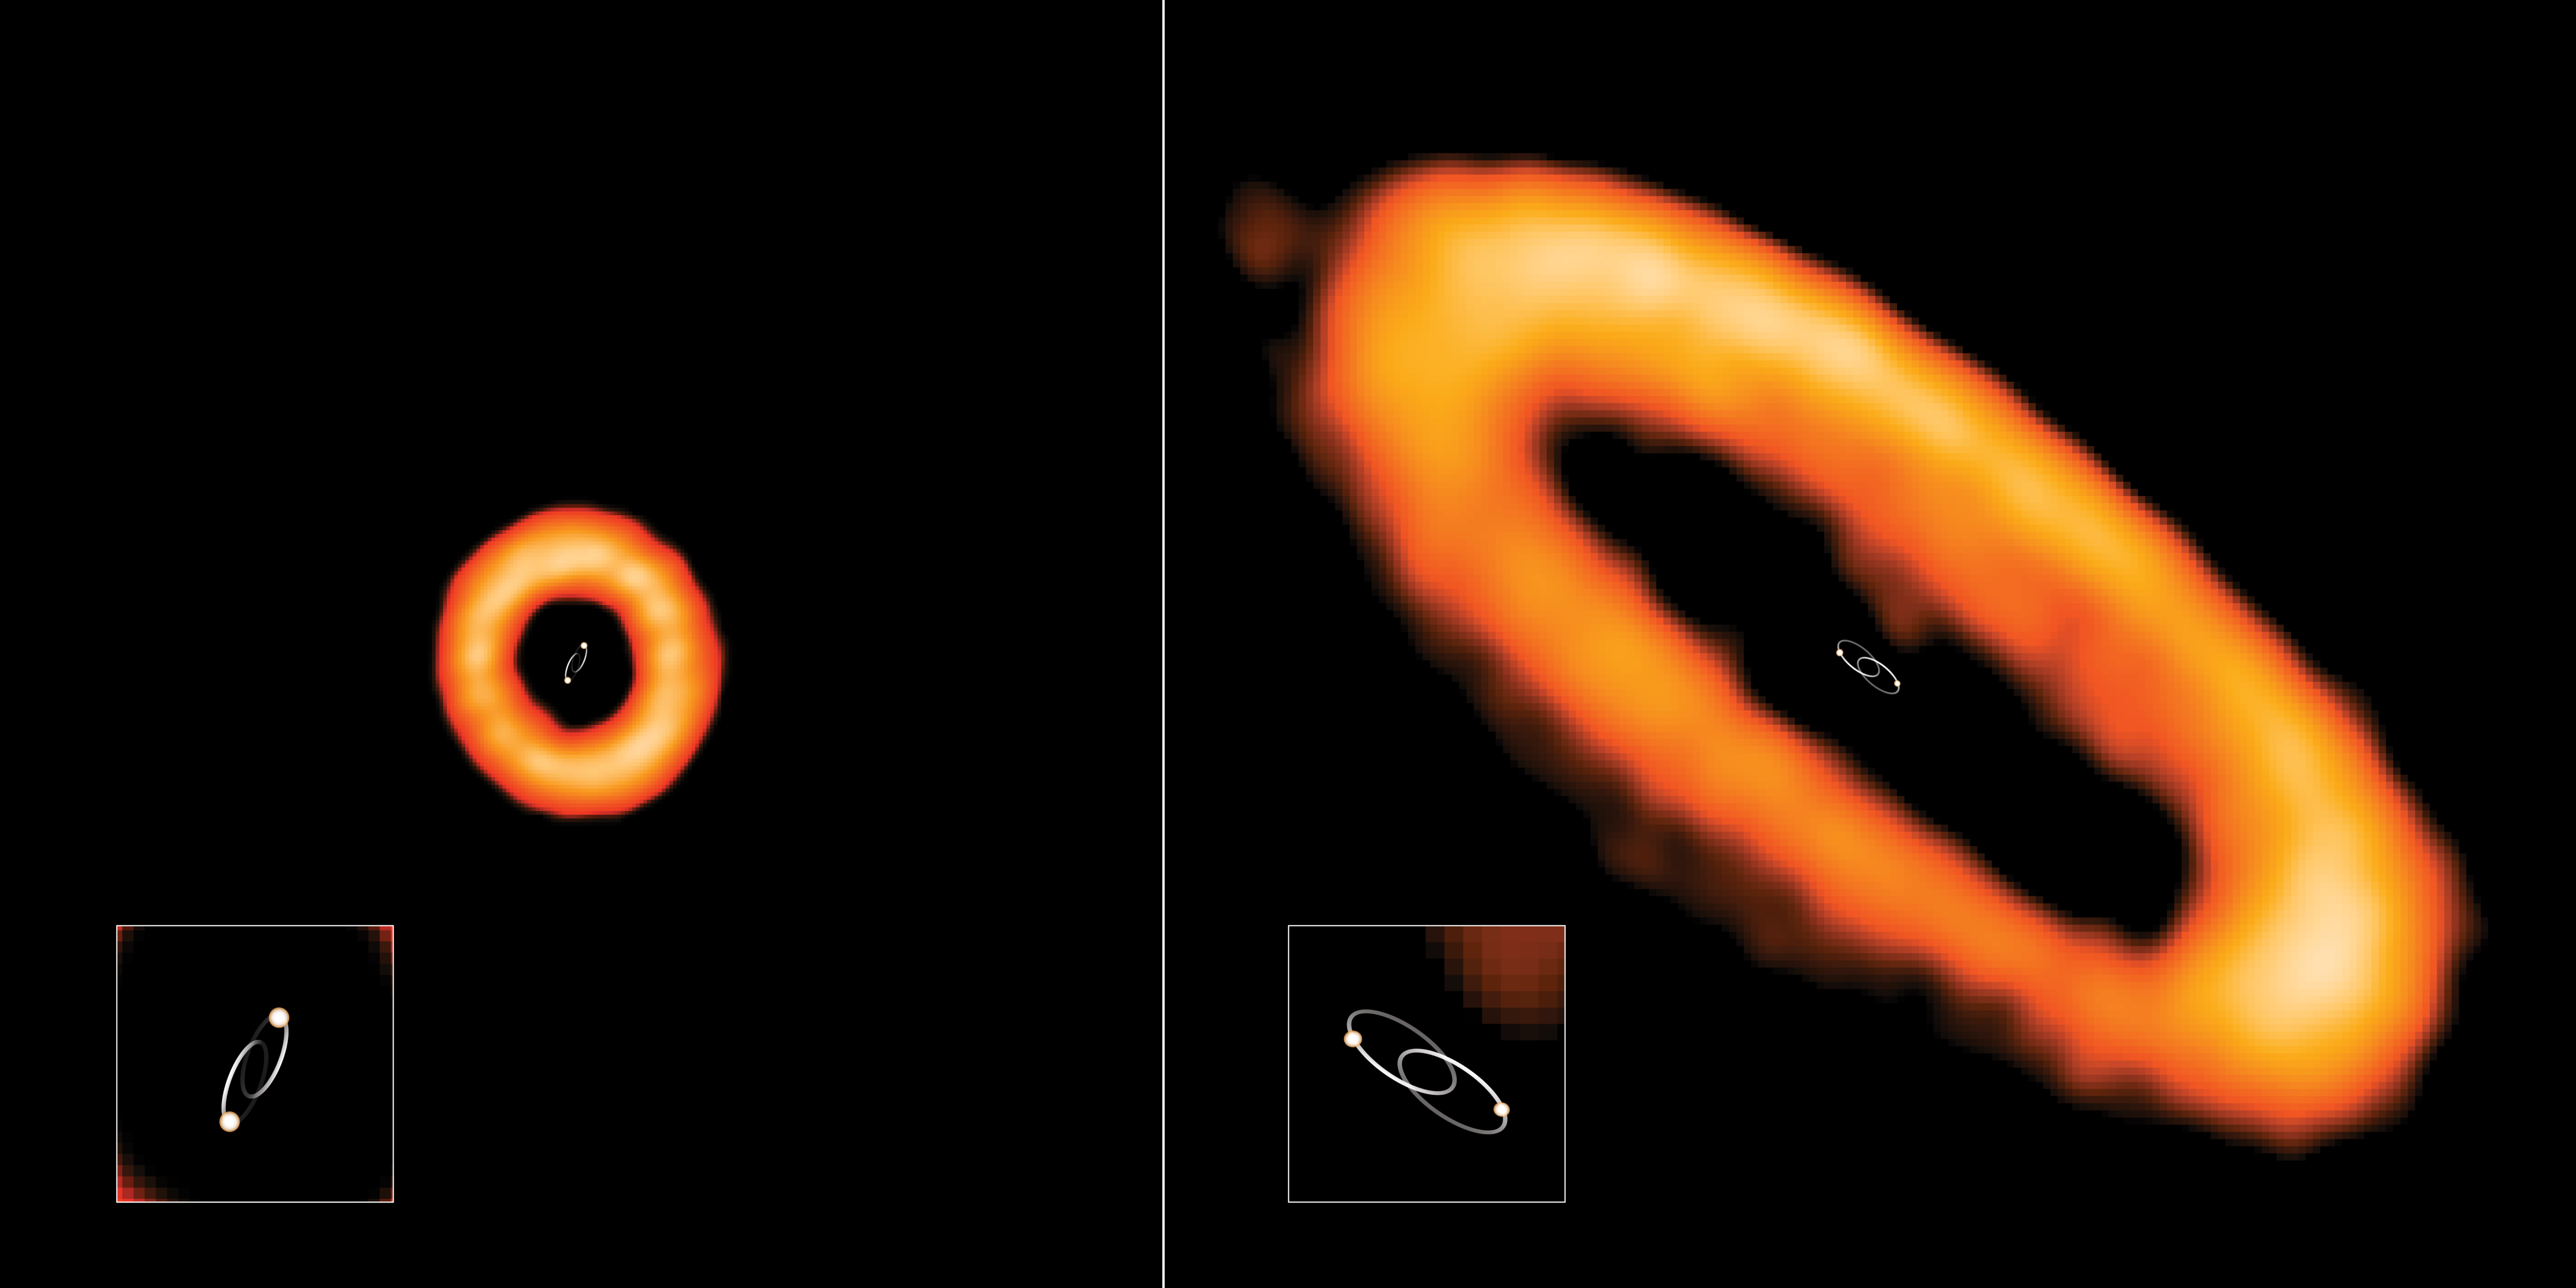 Two examples of aligned and misaligned protoplanetary disks around binary stars (circumbinary disks), observed with ALMA. Binary star orbits are added for clarity. Left: in star system HD 98800 B, the disk is misaligned with inner binary stars. The stars are orbiting each other (in this view, towards and away from us) in 315 days. Right: in star system AK Sco, the disk is in line with the orbit of its binary stars. The stars are orbiting each other in 13.6 days. Credit: ALMA (ESO/NAOJ/NRAO), I. Czekala and G. Kennedy; NRAO/AUI/NSF, S. Dagnello.